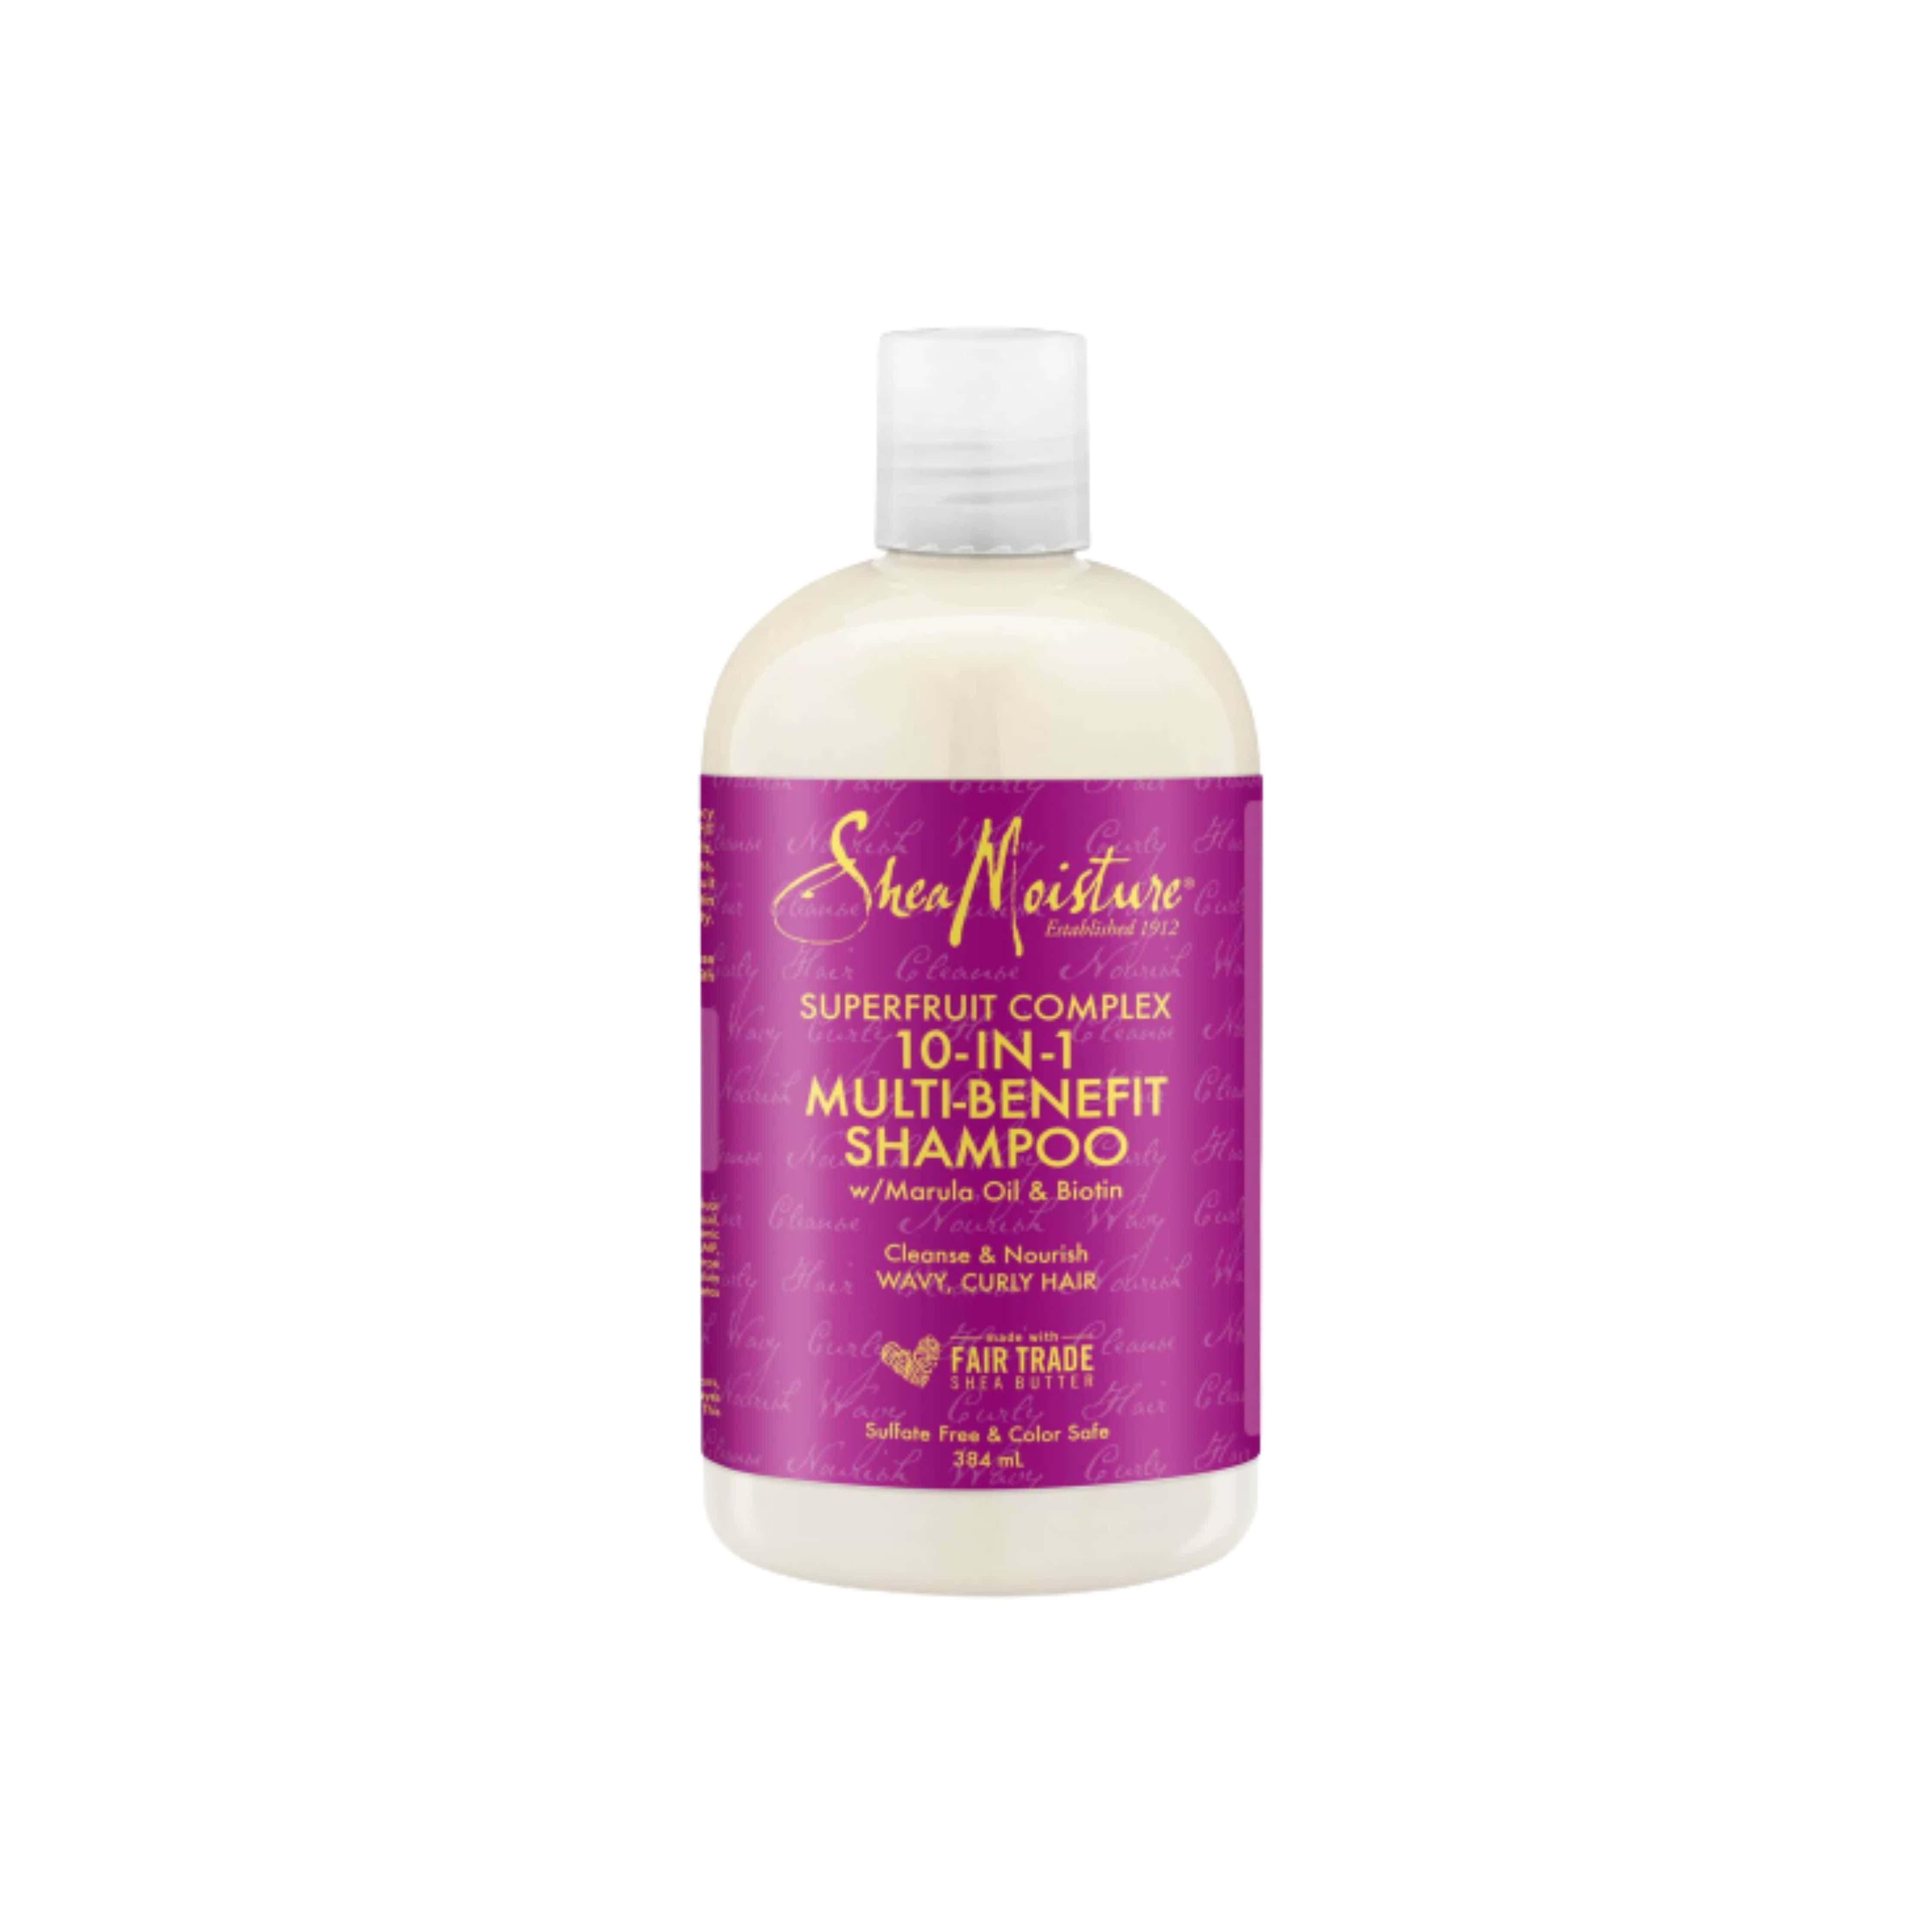 SUPERFRUIT COMPLEX 10-IN-1 RENEWAL SYSTEM SHAMPOO